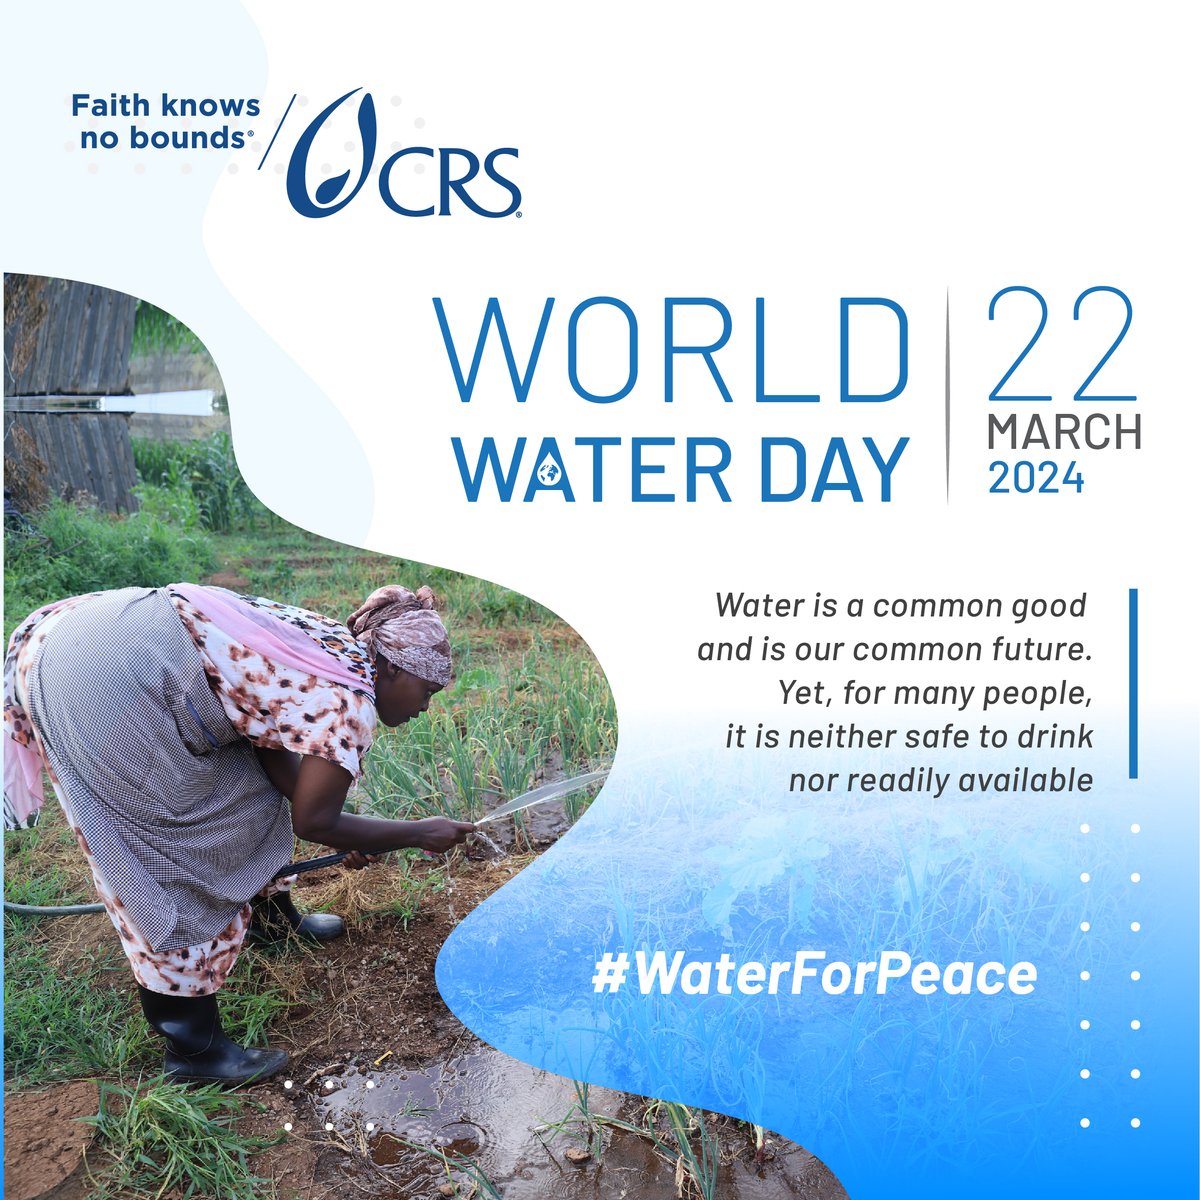 Safe and clean drinking water🚰 and sanitation a human right essential to the full enjoyment of life and all other human rights. #WaterForPeace